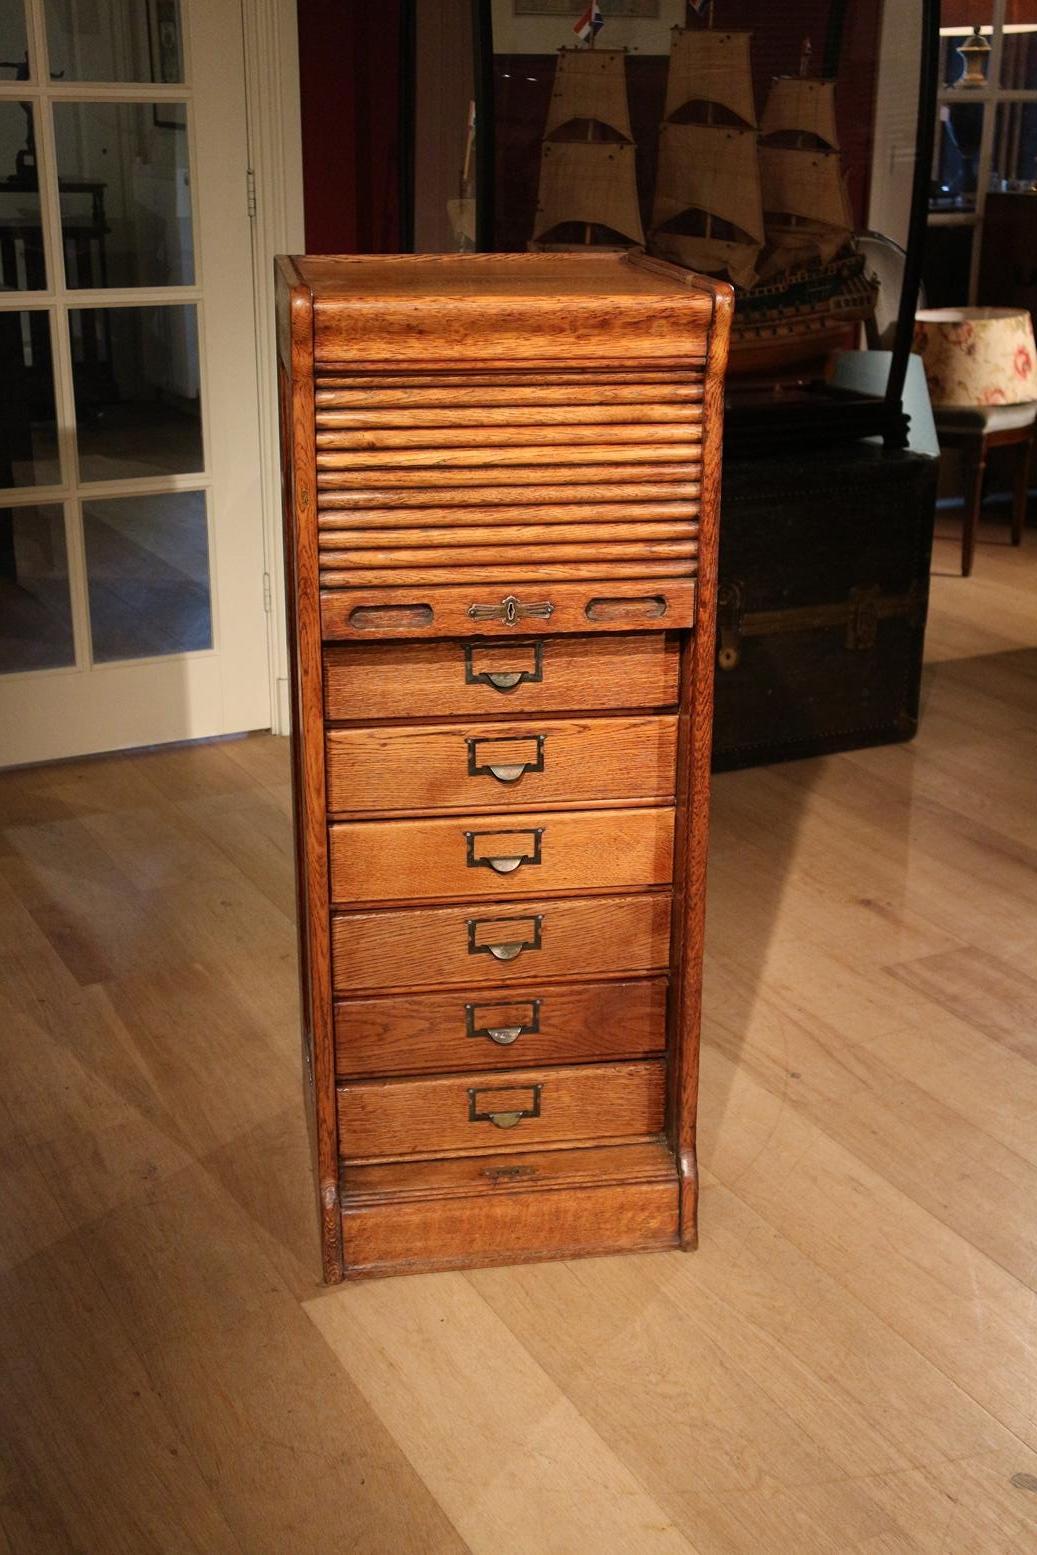 Antique oak filing cabinet with roller shutter and drawers behind it. Nice patina and good quality.
Origin: England
Period: Approx. 1920
Size: 44cm x 42cm x H 112cm
No lock.